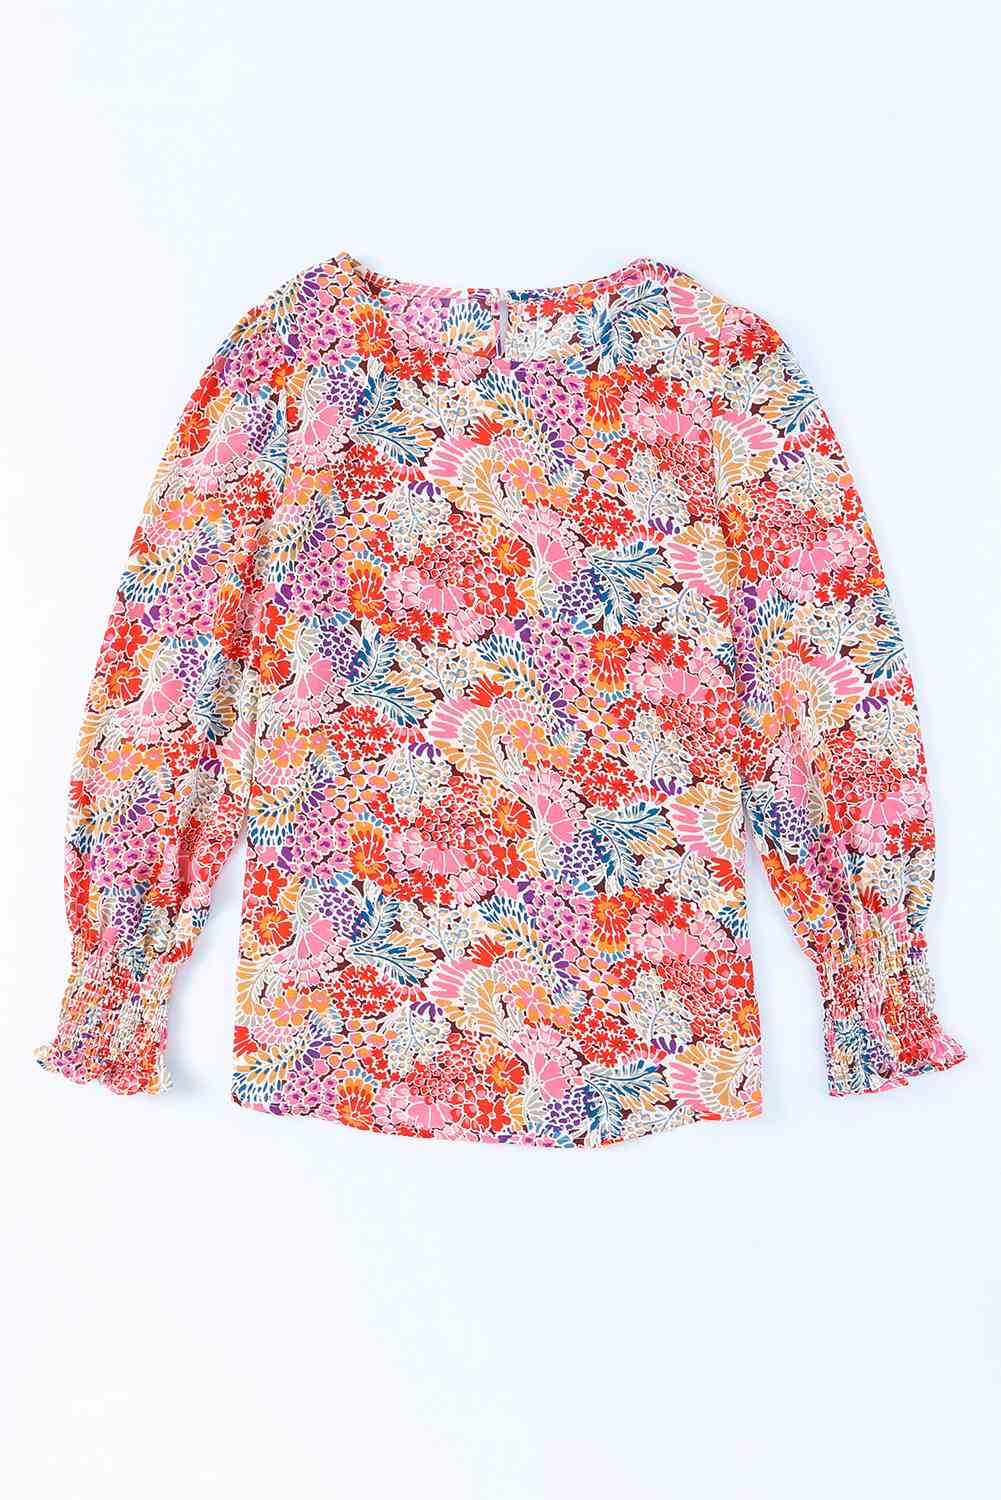 Floral Print Long Puff Sleeve Blouse - Tophatter Deals